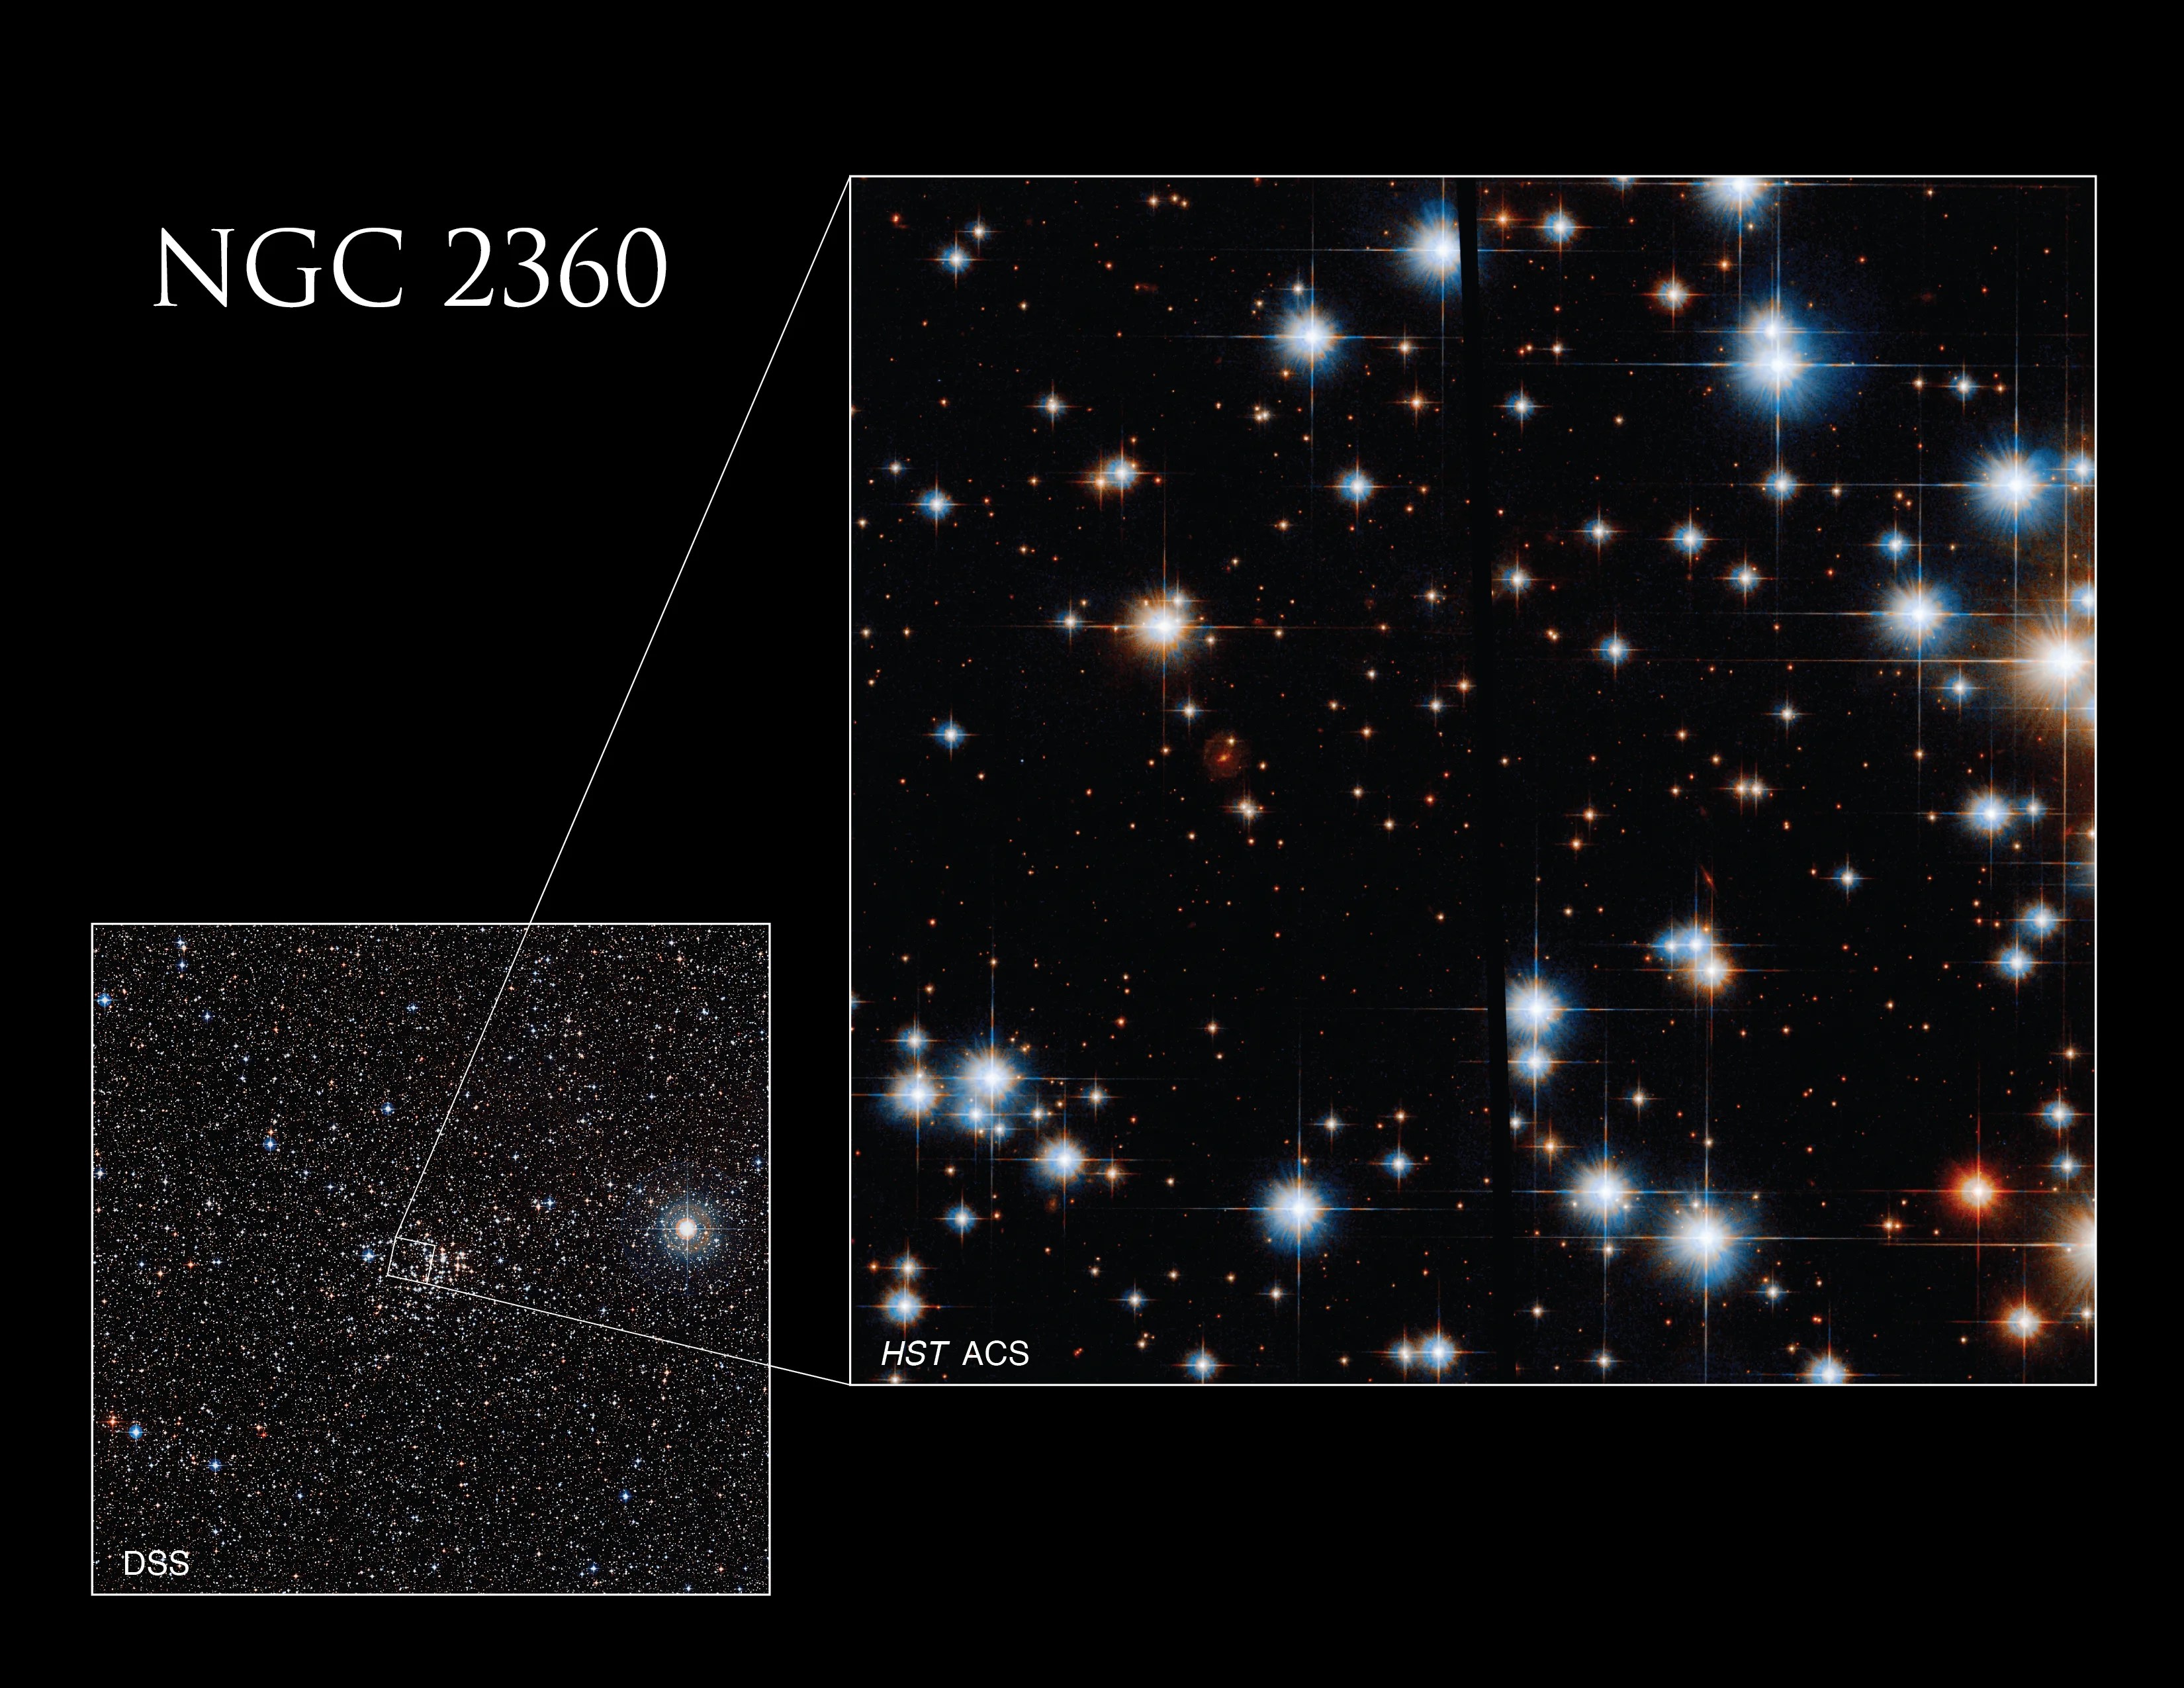 Caroline's Cluster is shown as an inset image from a Digitized Sky Survey ground-based image of C58, which has a much thicker concentration of stars.